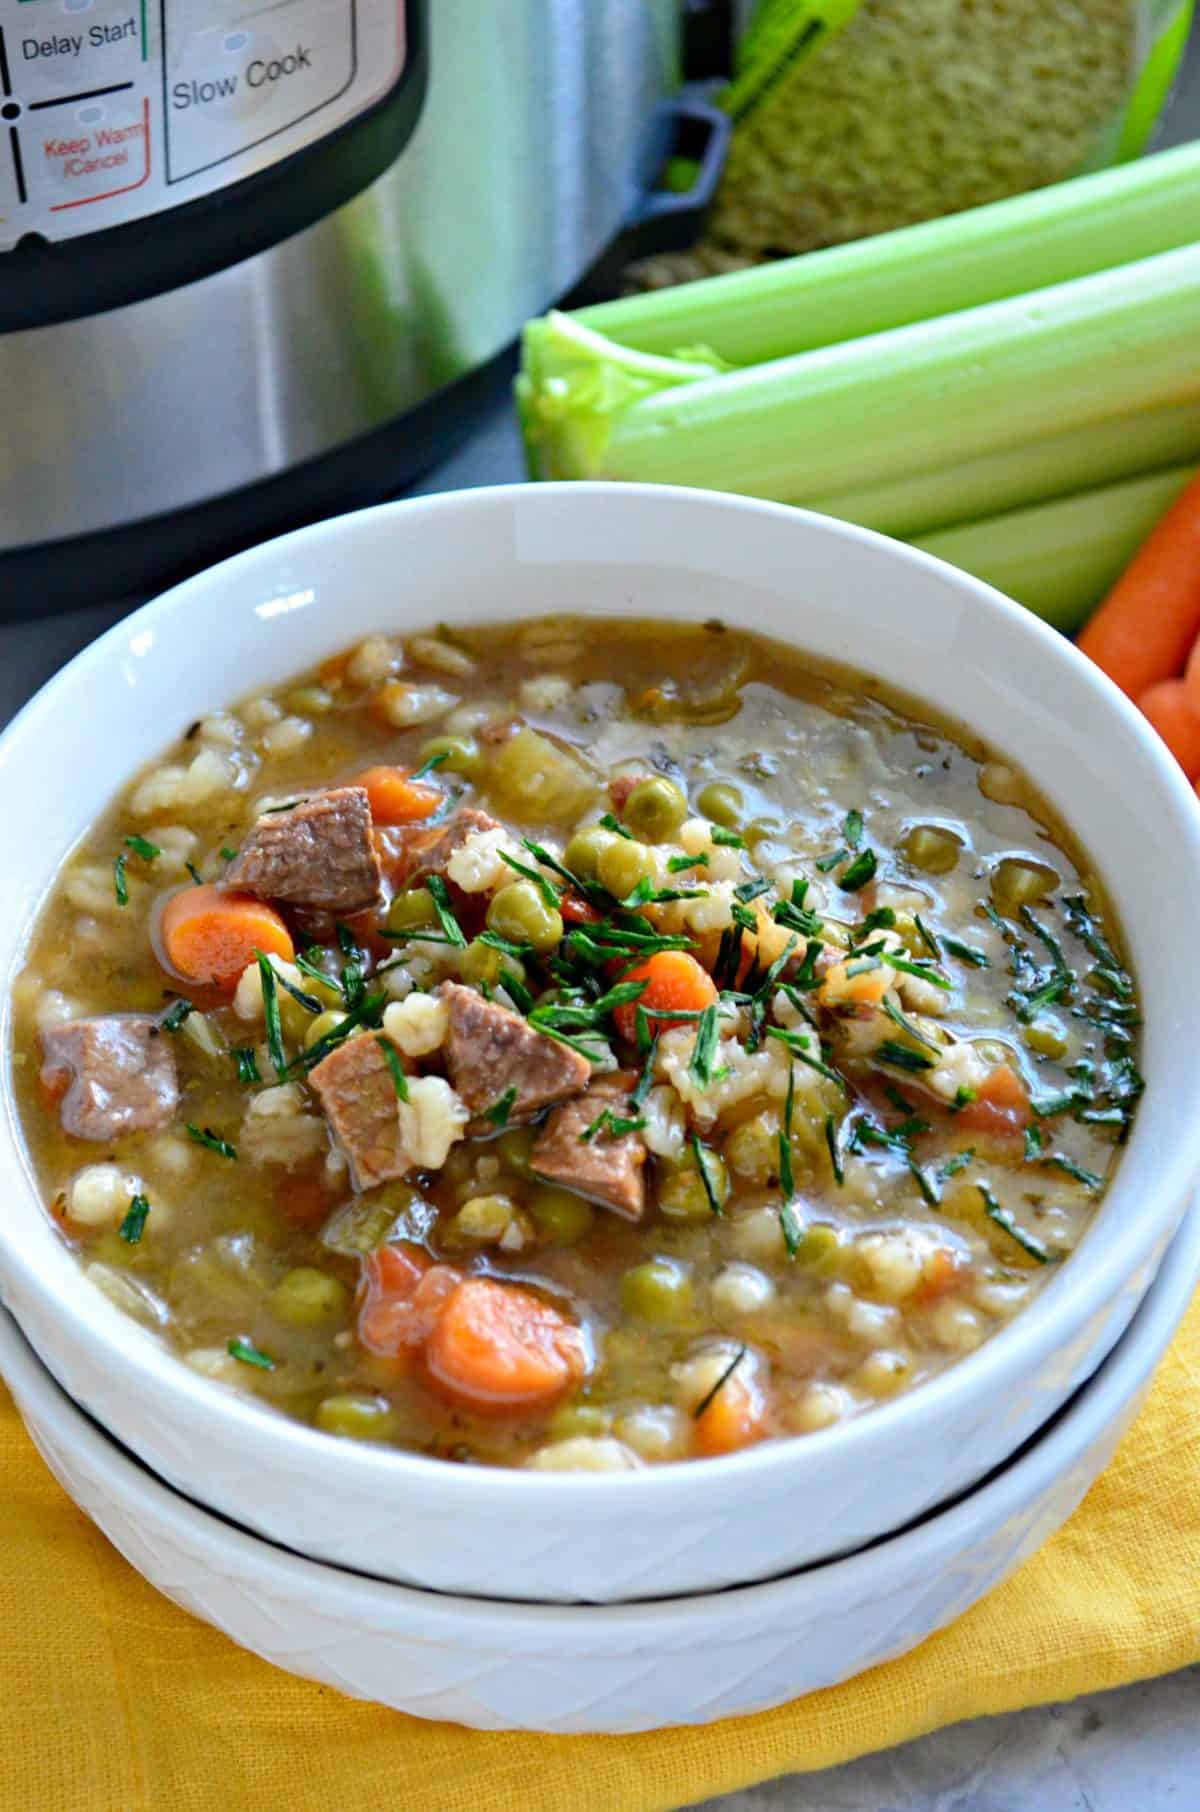 closeup bowl of brown soup with barley, beef, peas, carrots, celery and herbs in front of fresh celery.